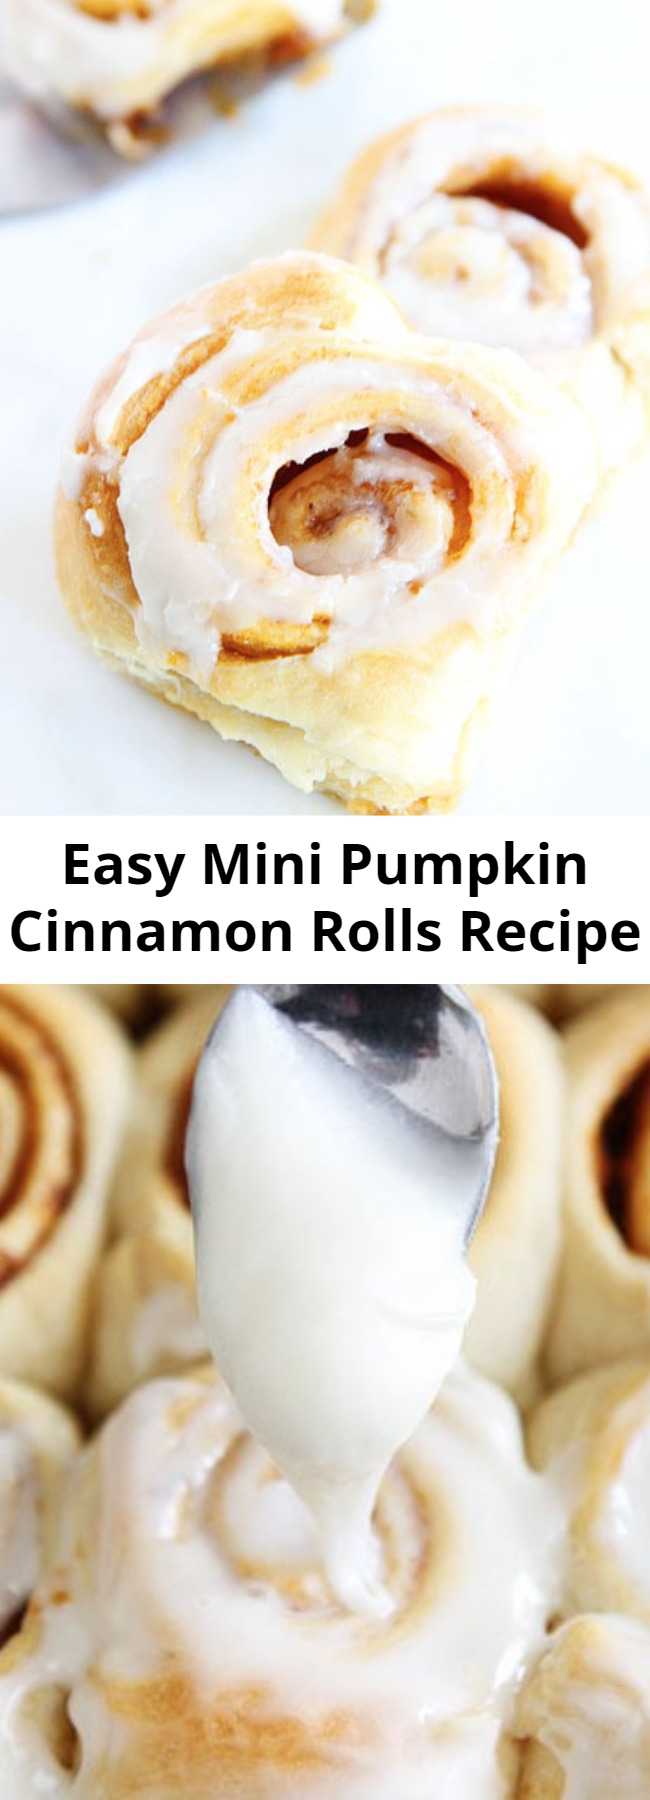 Easy Mini Pumpkin Cinnamon Rolls Recipe - Mini cinnamon rolls made with pumpkin butter and cream cheese frosting! The best part? They take less than 30 minutes to make!